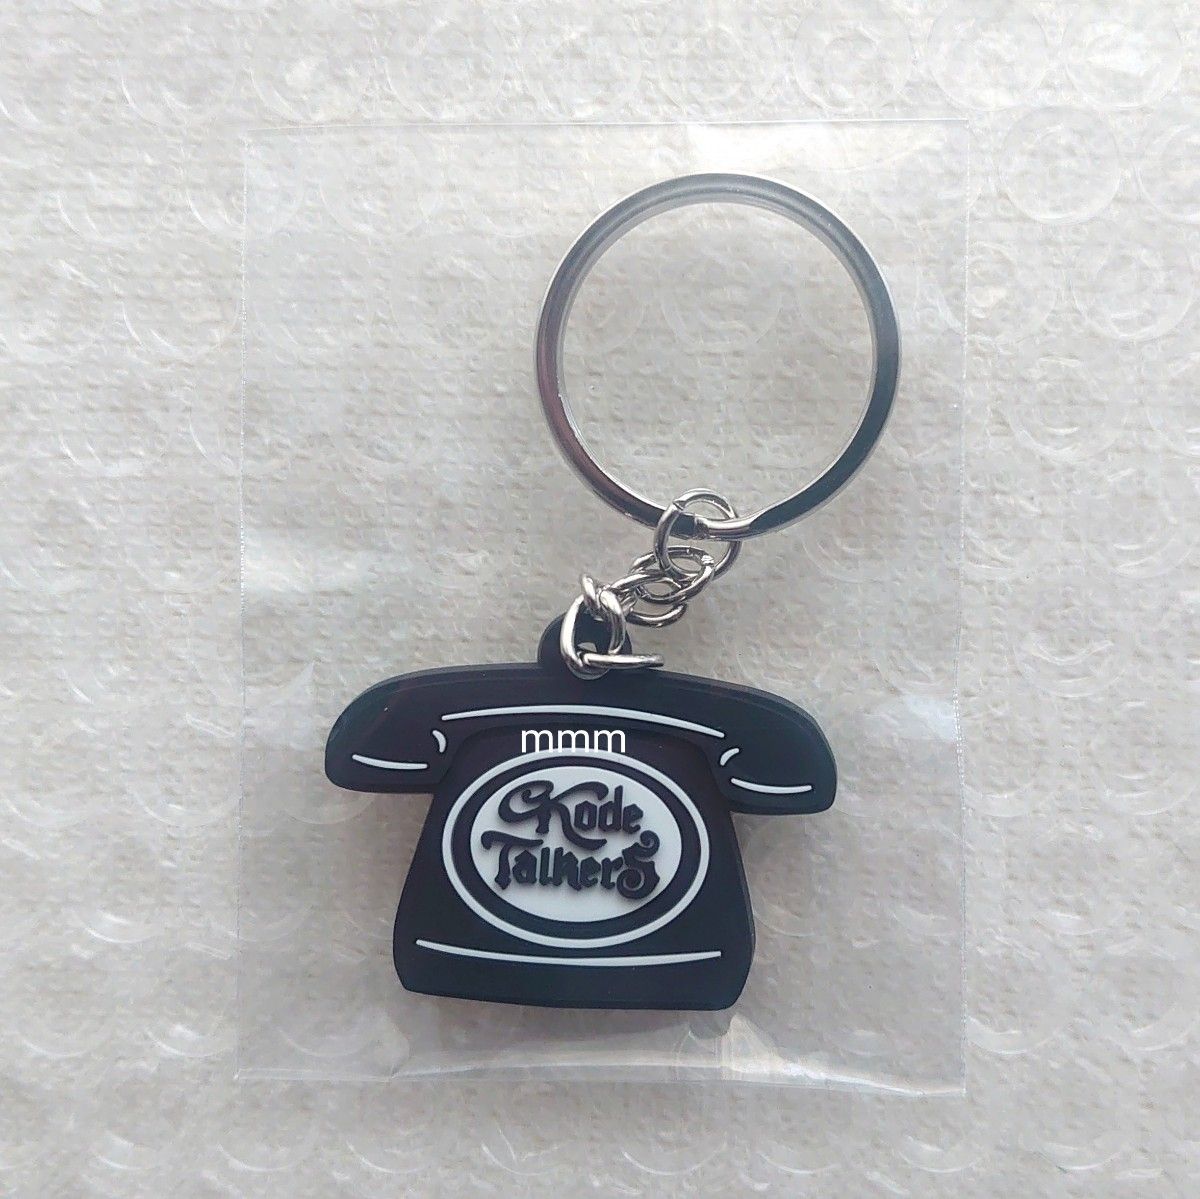 Kode Talkers KT KEY RING 未開封新品 長瀬智也 CHALLENGER RECORDS